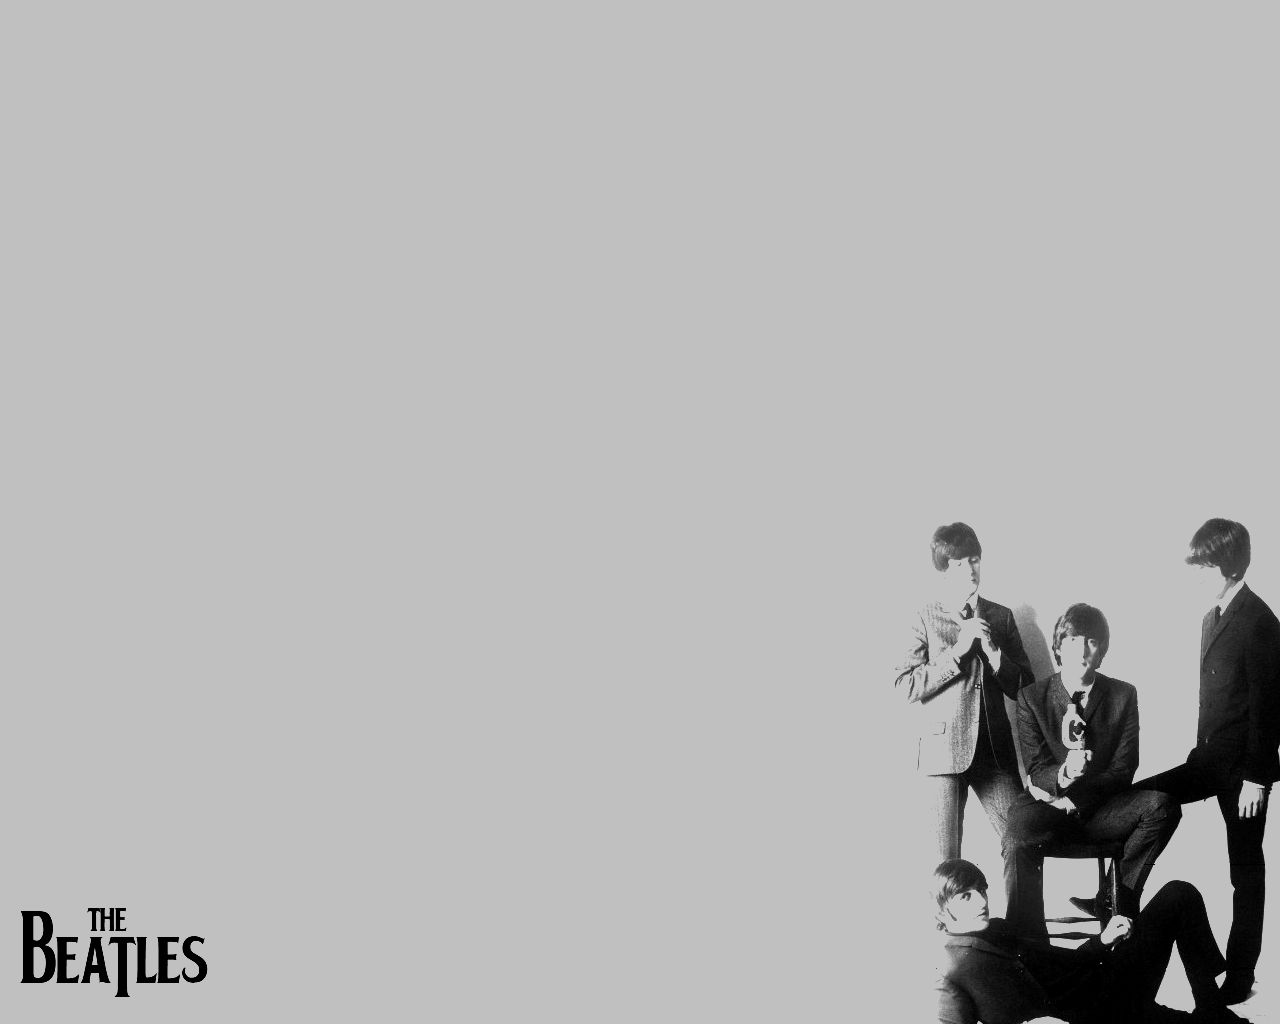 The Beatles Backgrounds powerpoint backgrounds